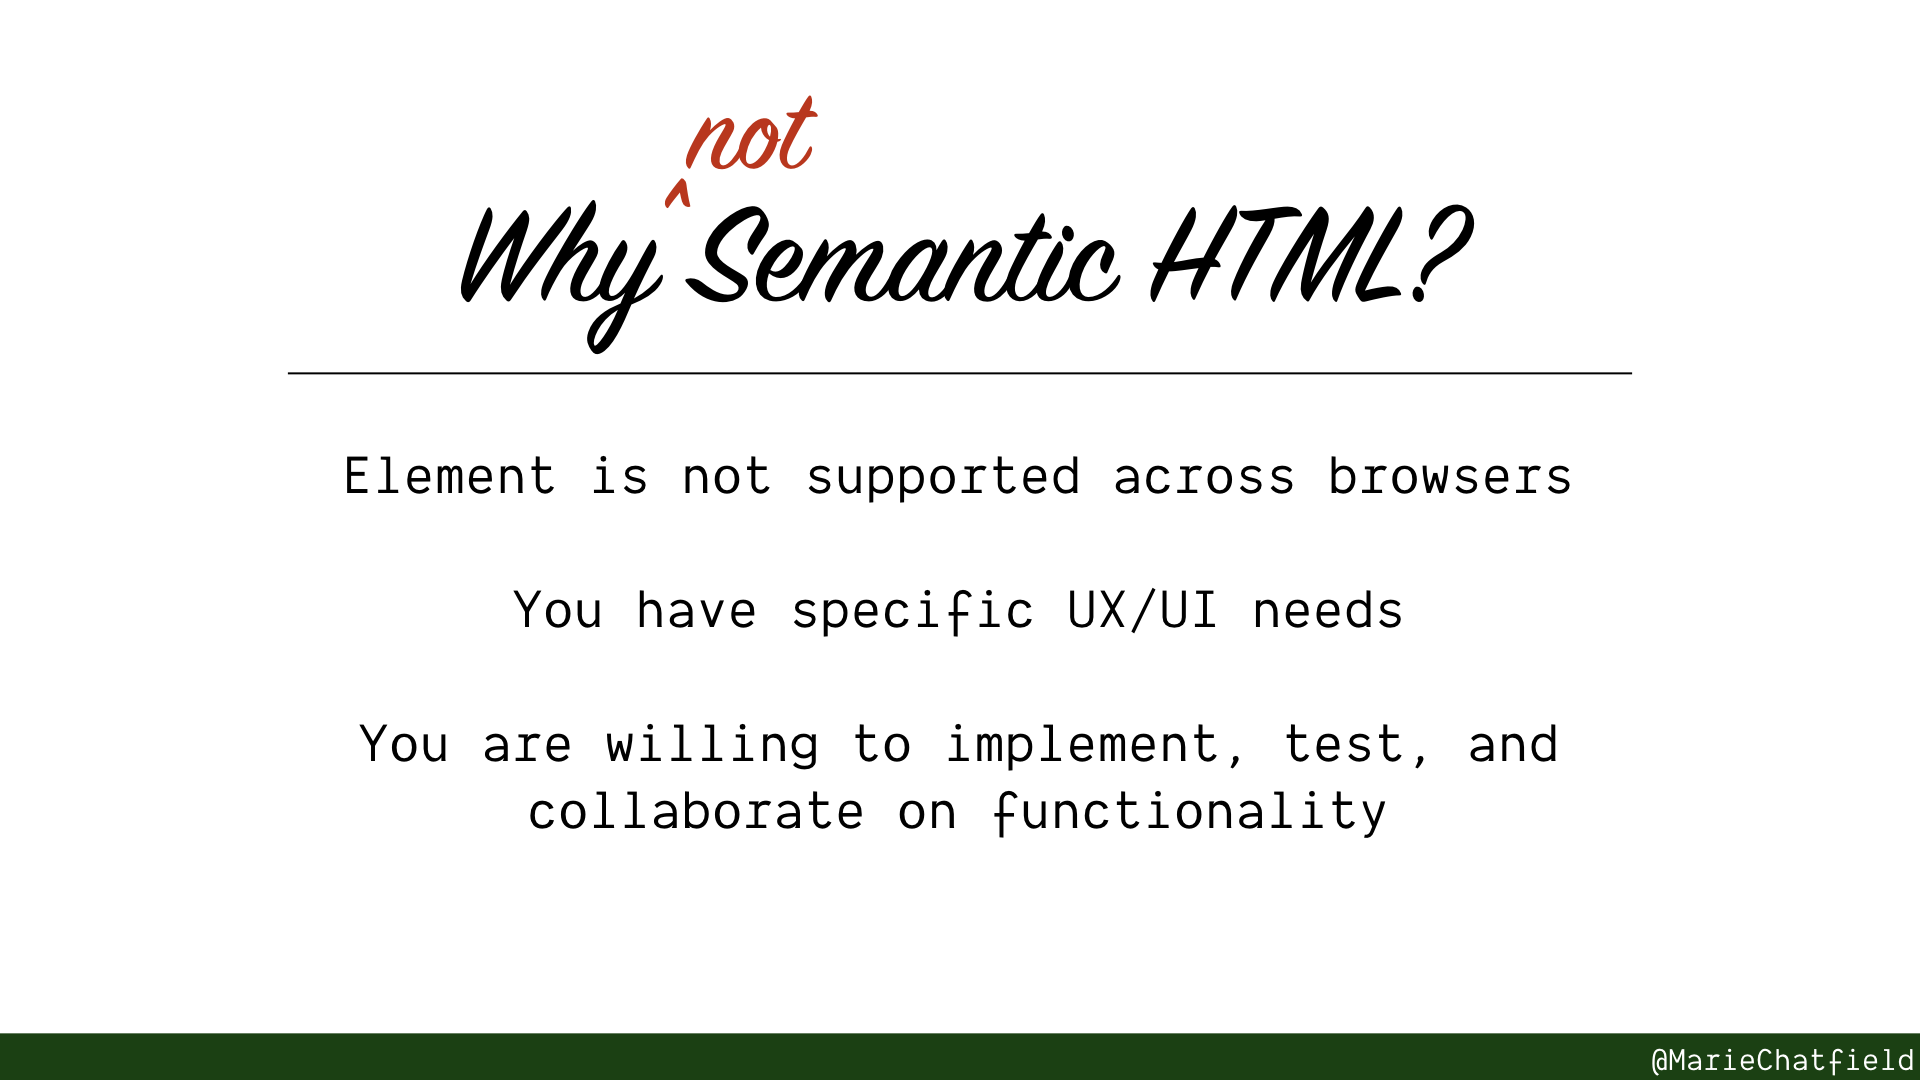 When not to use Semantic HTMl slide